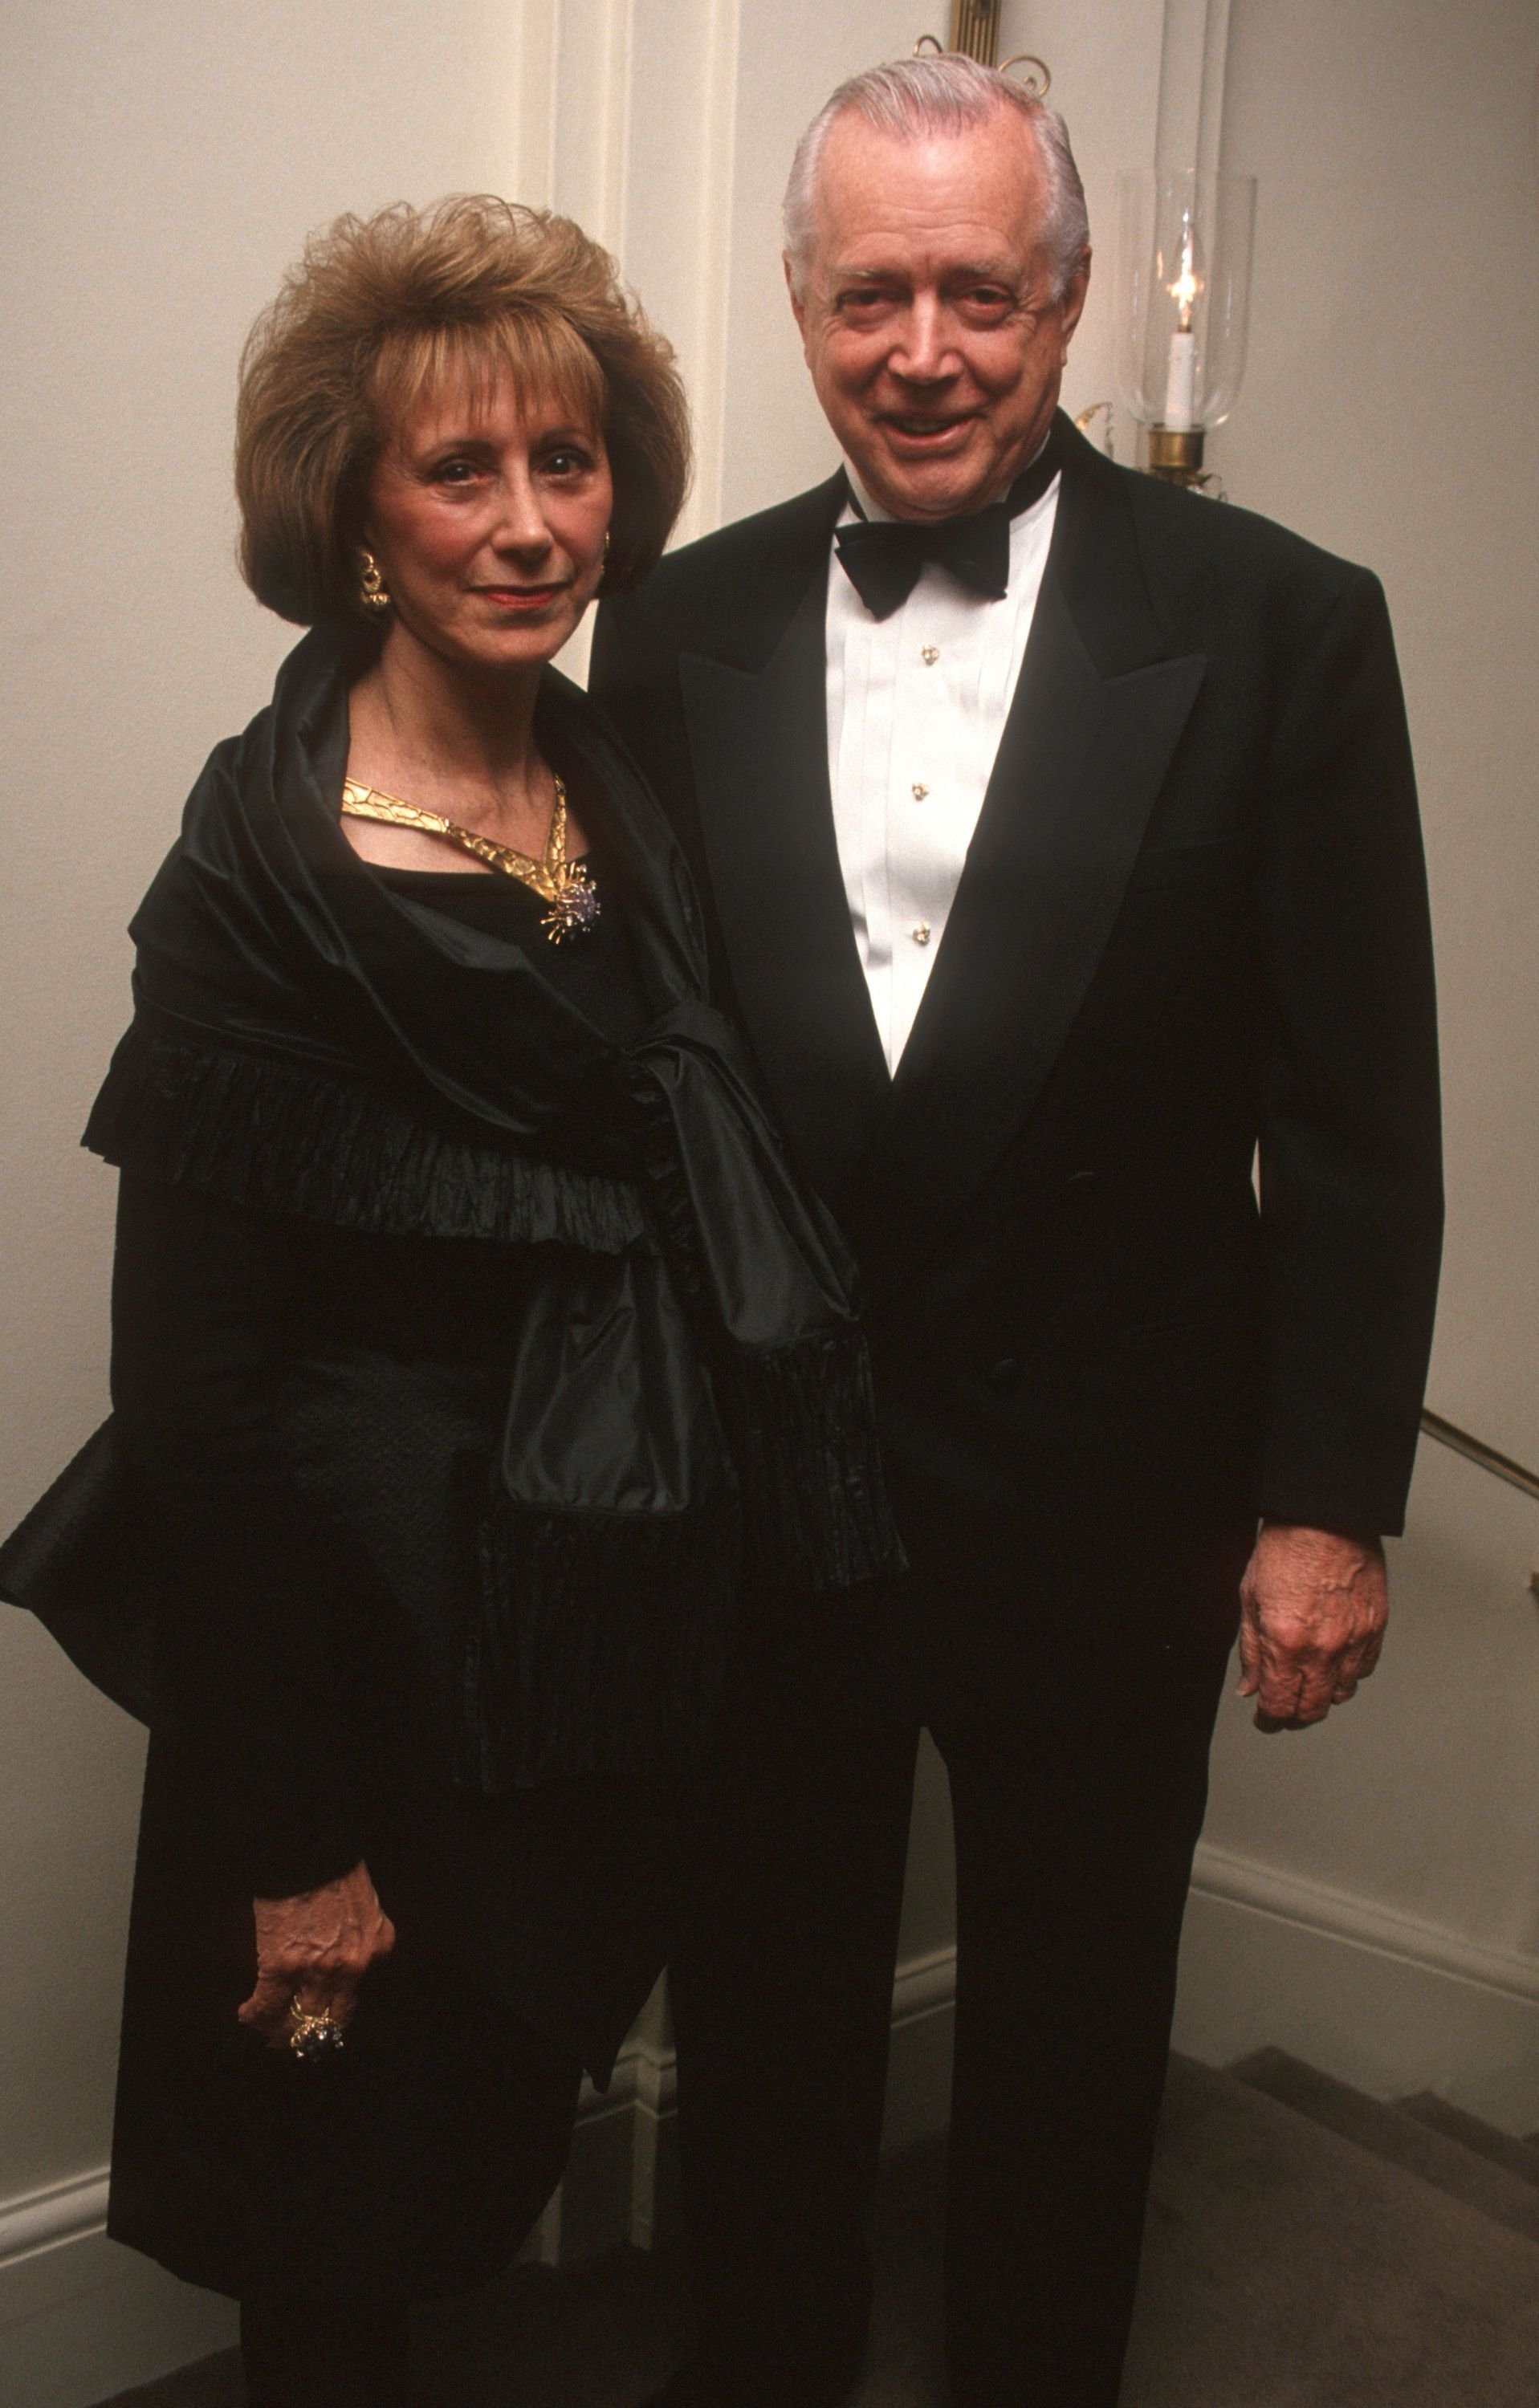 Ruth Downs and Hugh Downs at the CASA Honors James Burke and Daniel Burke benefit in New York | Source: Getty Images